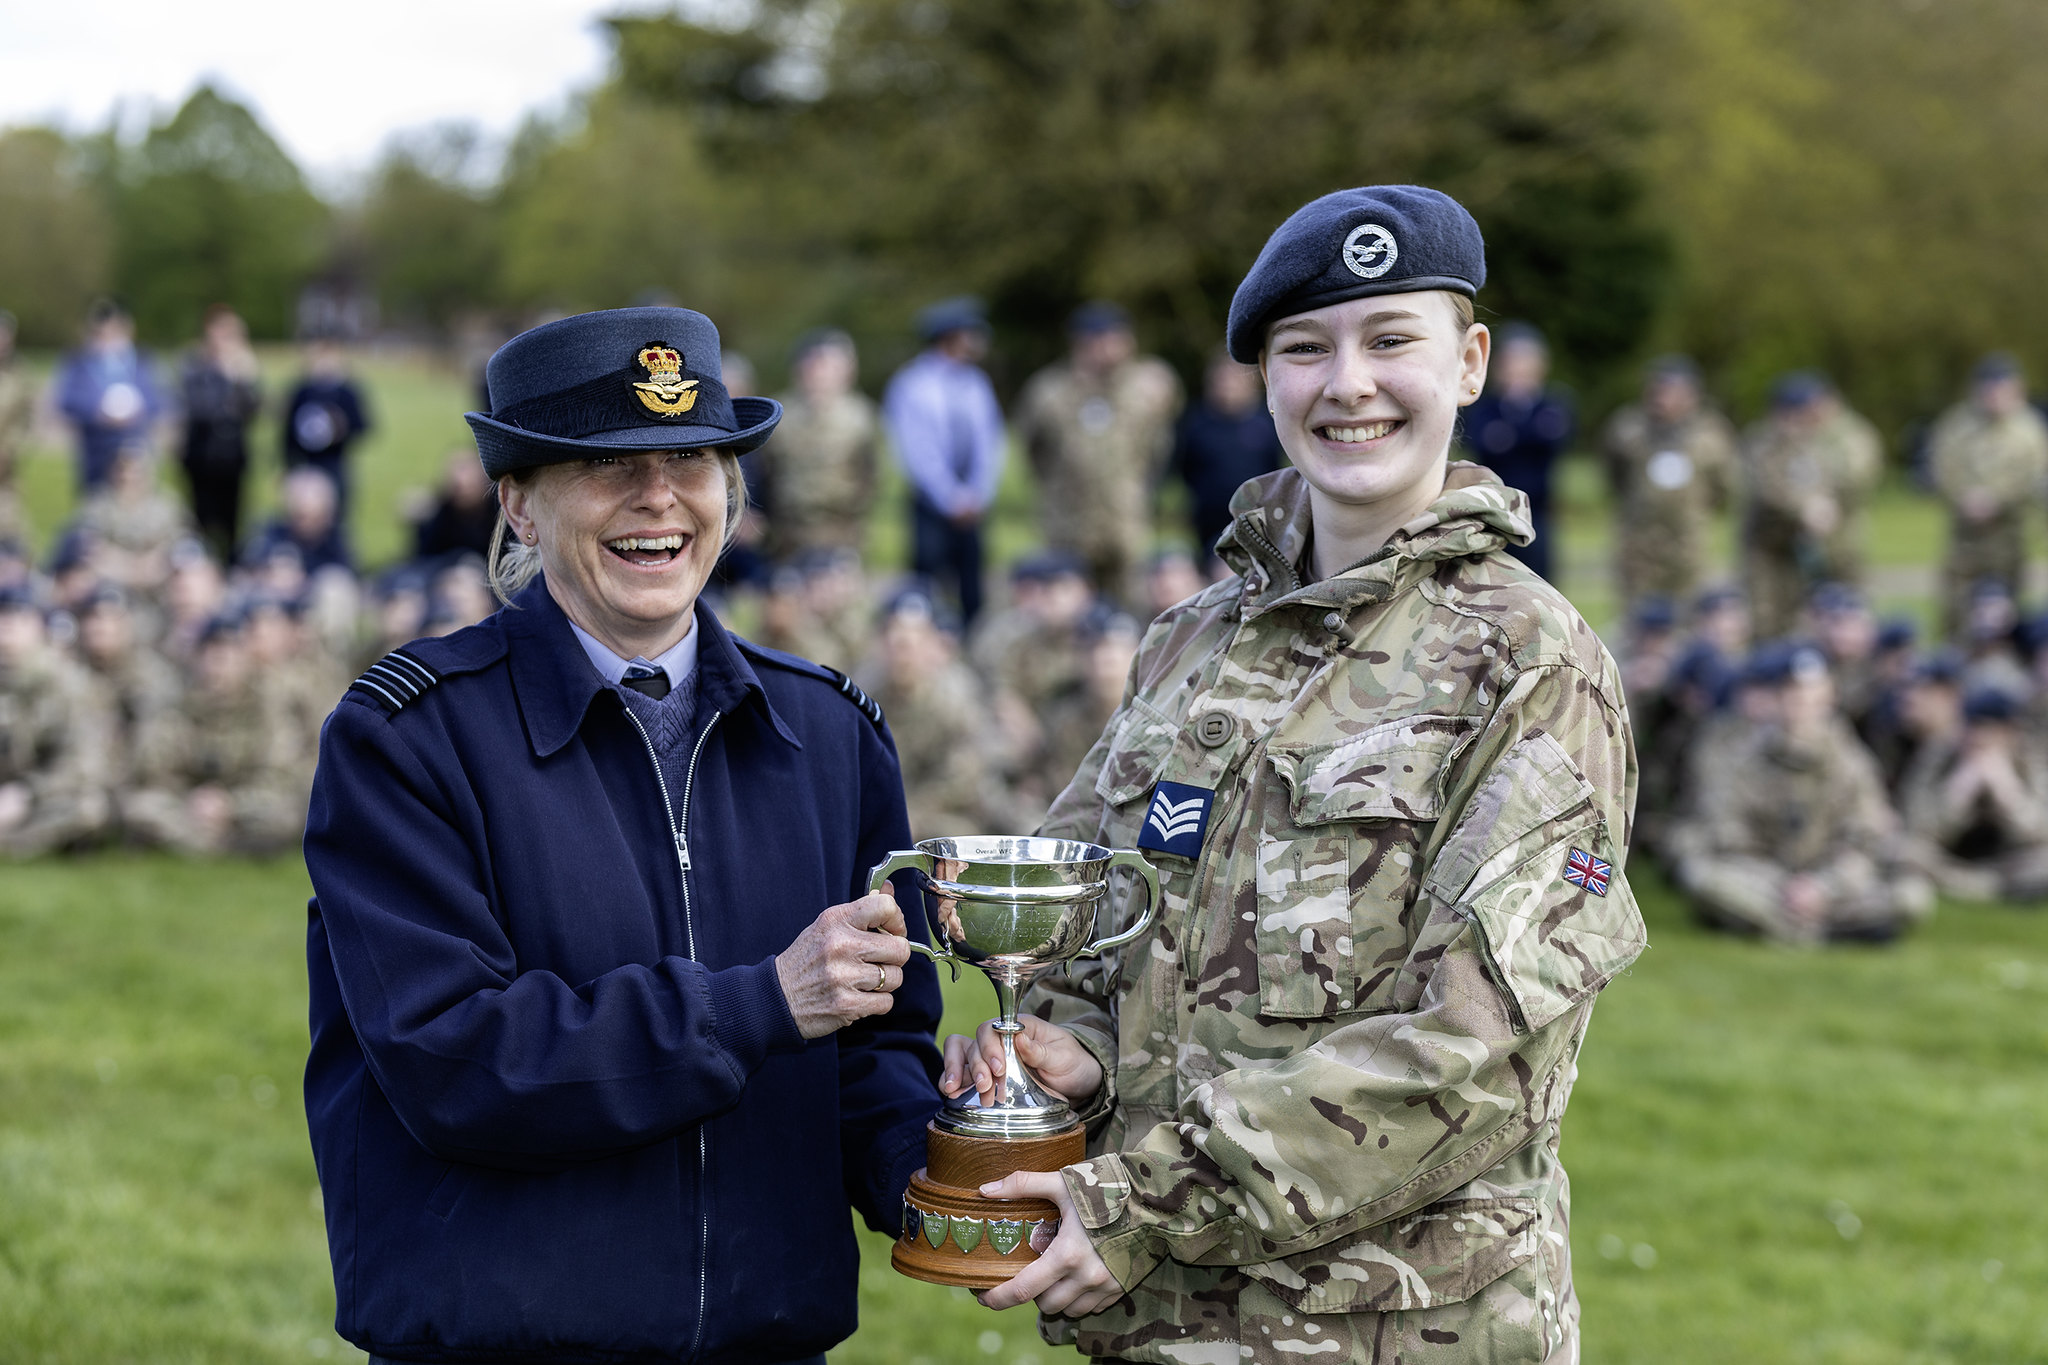 Cadet collecting trophy from Wing Commander